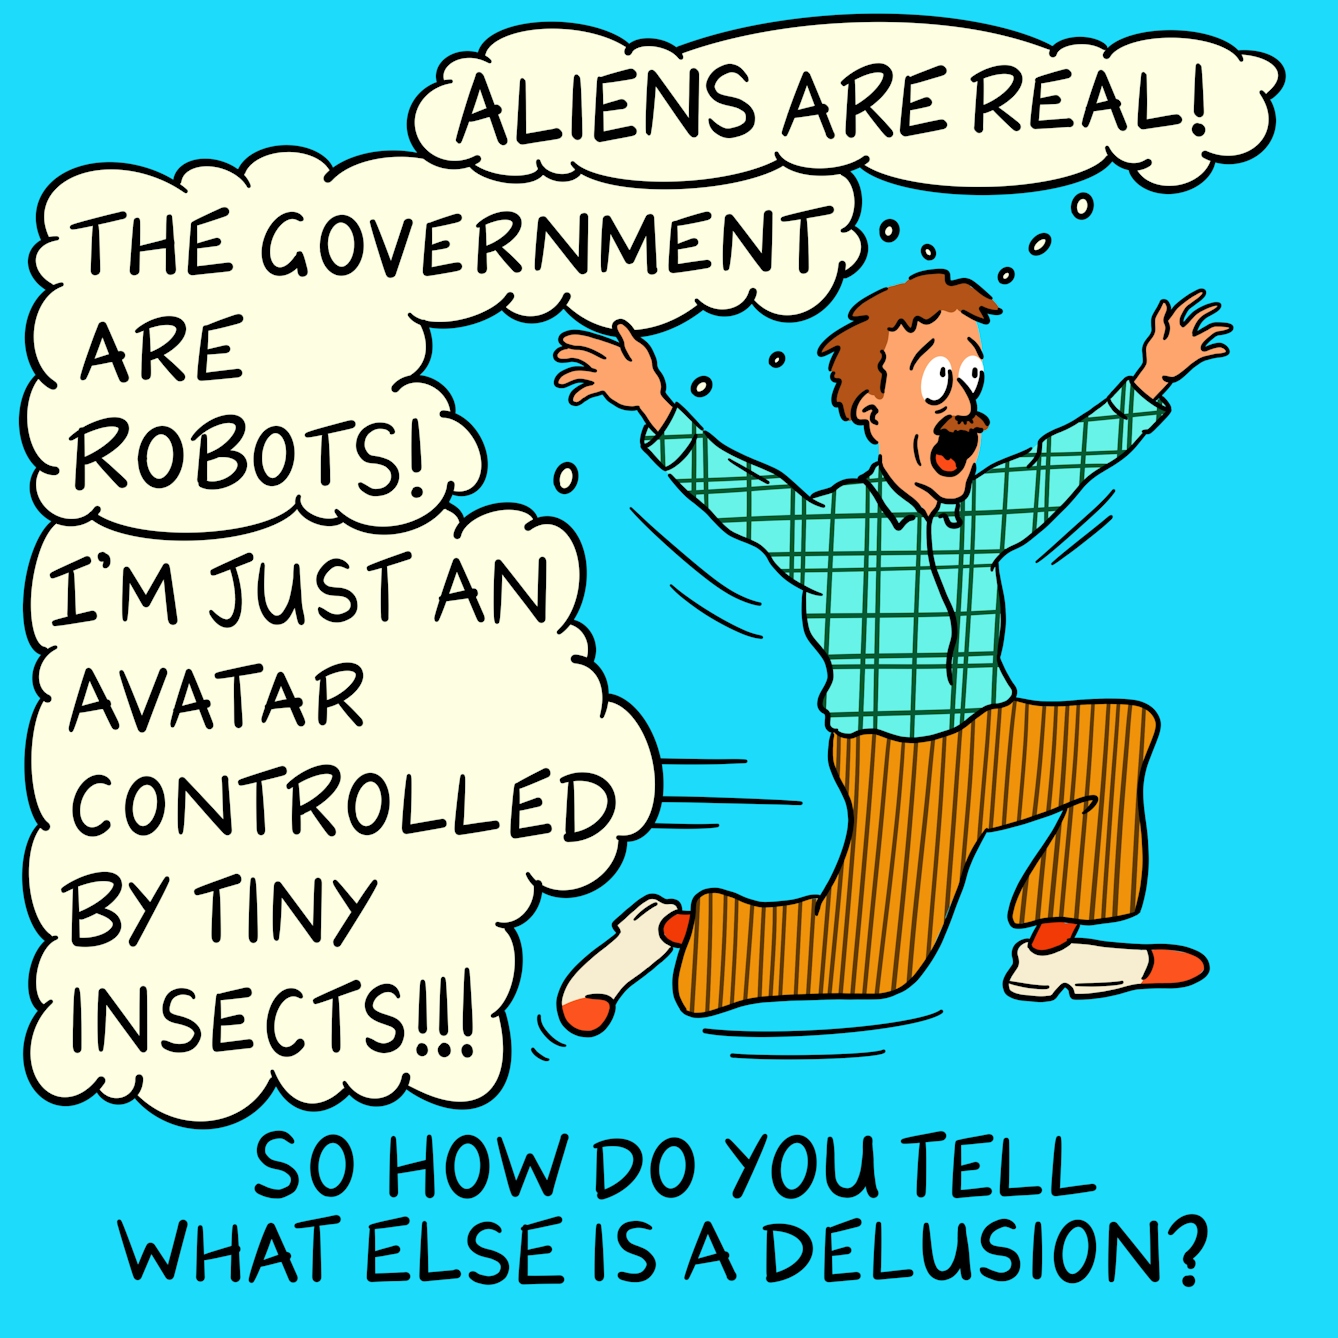 Panel 4 of a four-panel comic drawn digitally: a white man with a moustache, corduroy trousers and a plaid shirt runs along frantically waving arms and legs, with thought bubbles expressing fears such as "Aliens are real!" "The government are robots!" and "I'm just an avatar controlled by tiny insects!!!". The caption text reads "So how do you tell what else is delusion?"